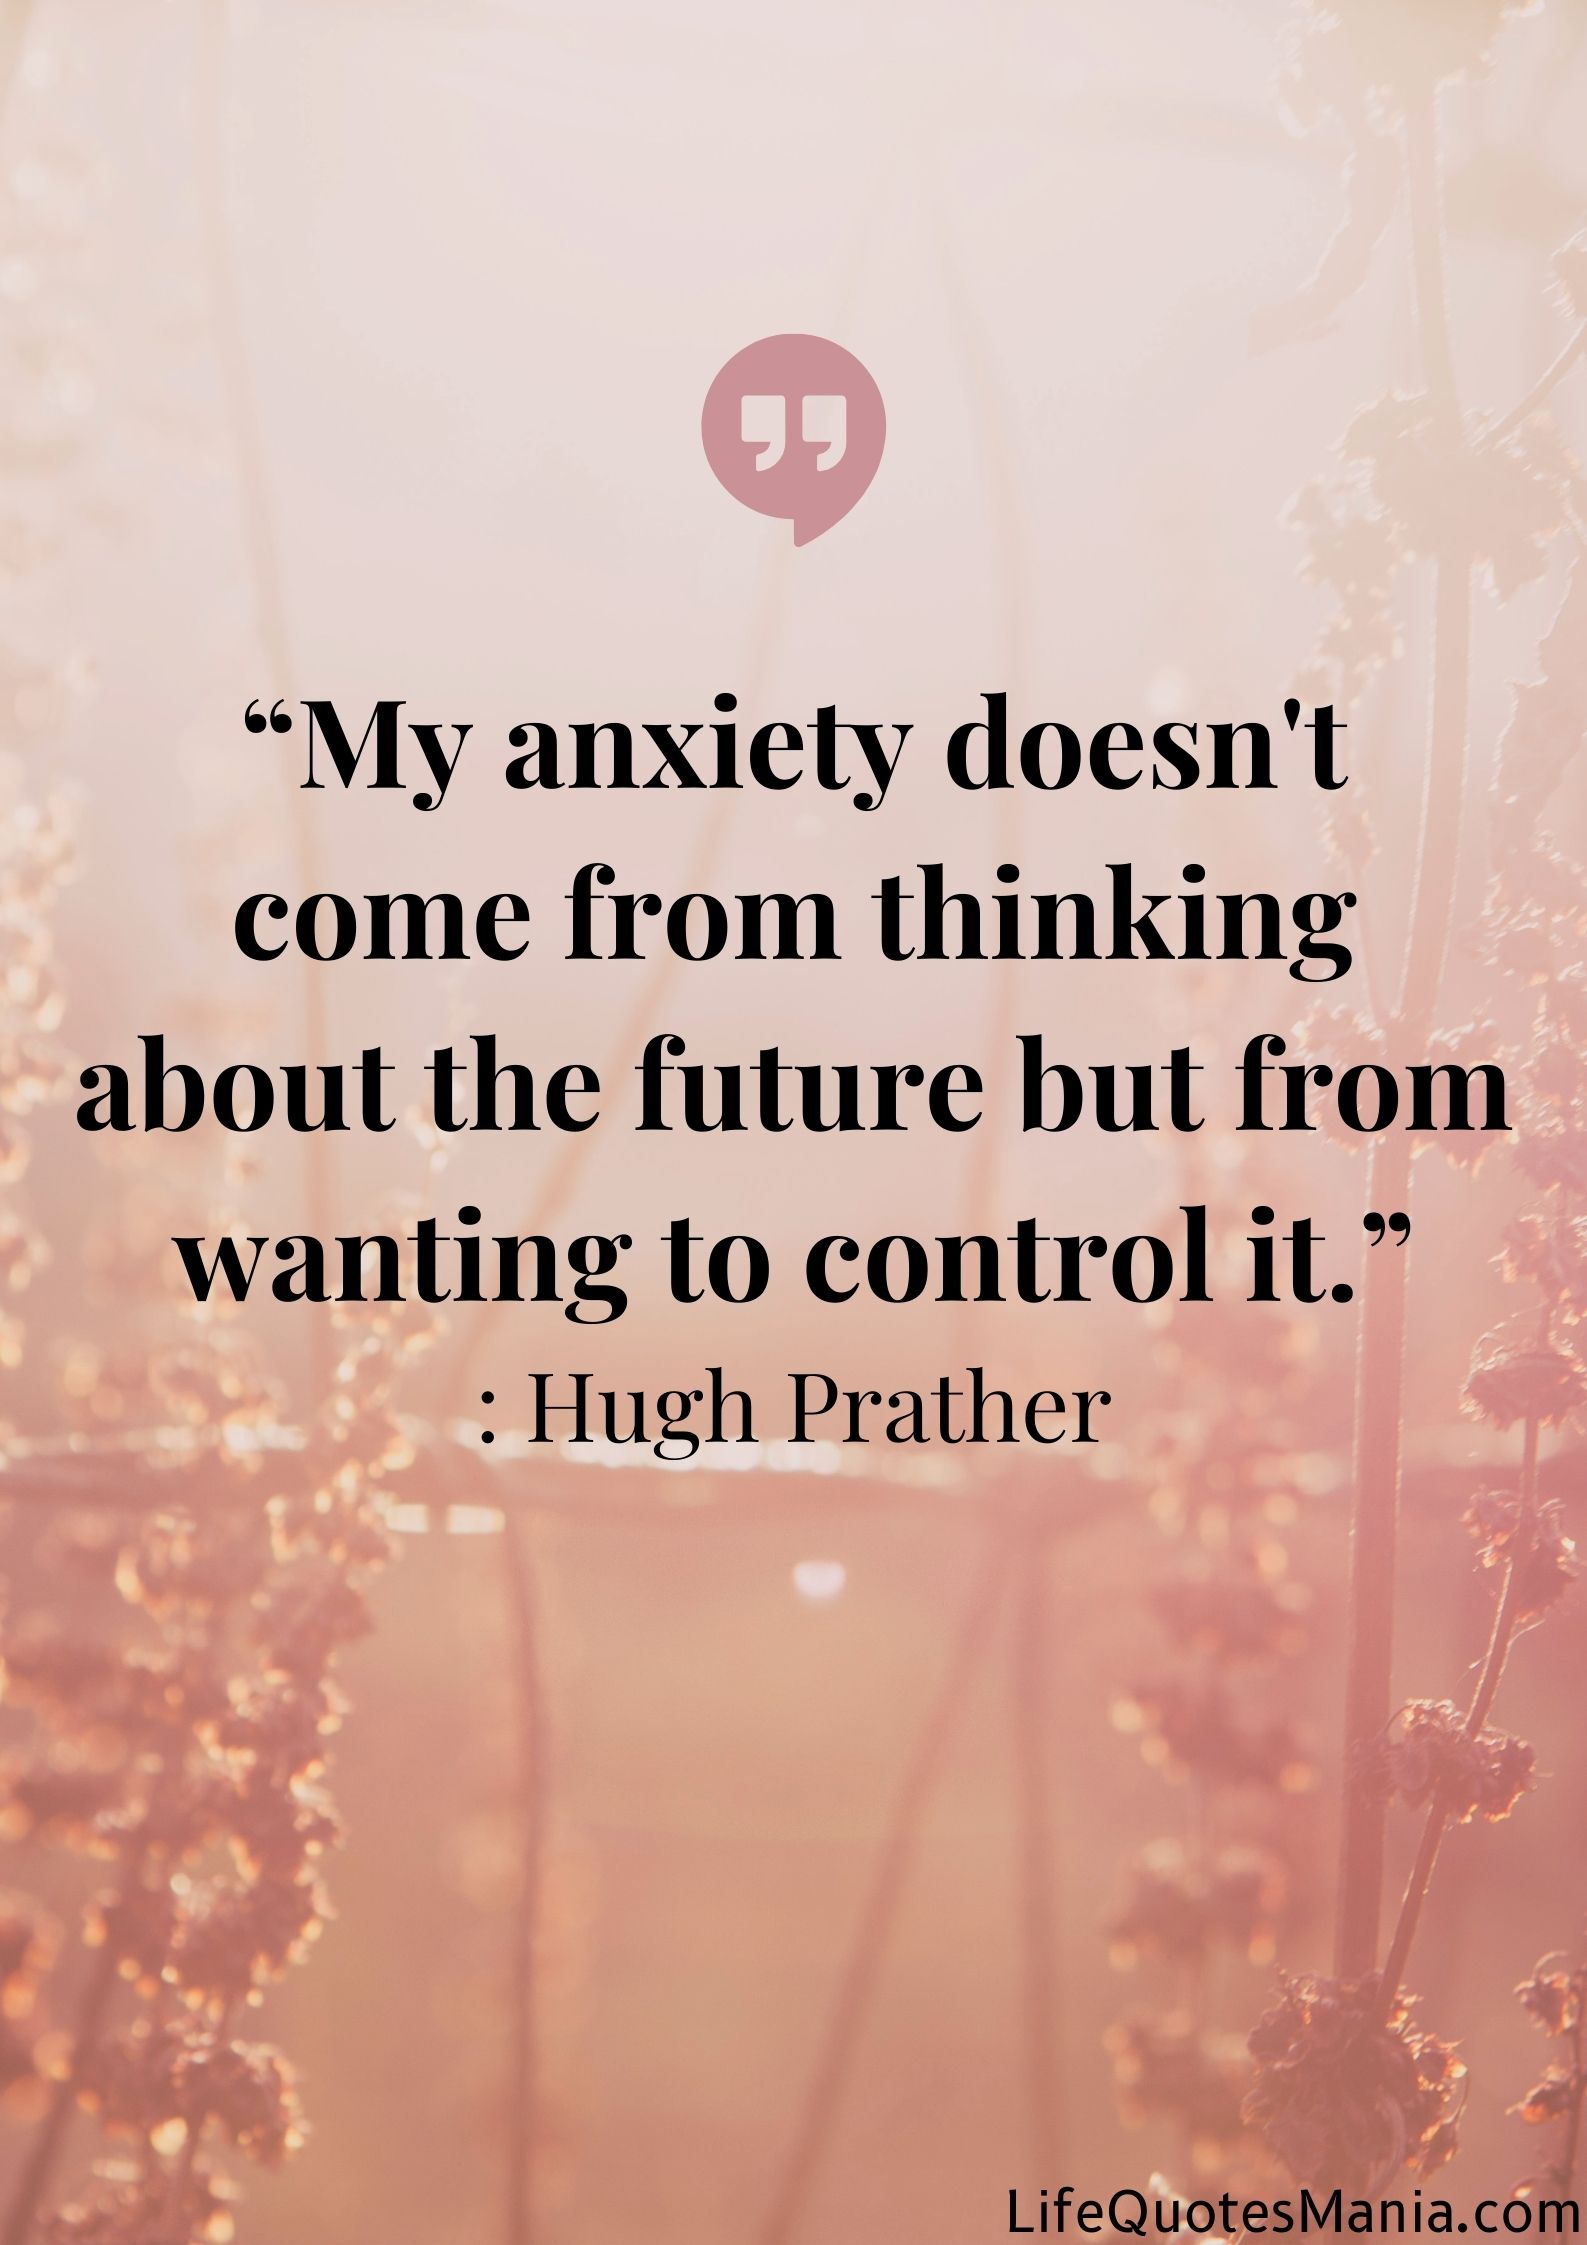 Anxiety Quotes - Hugh Prather